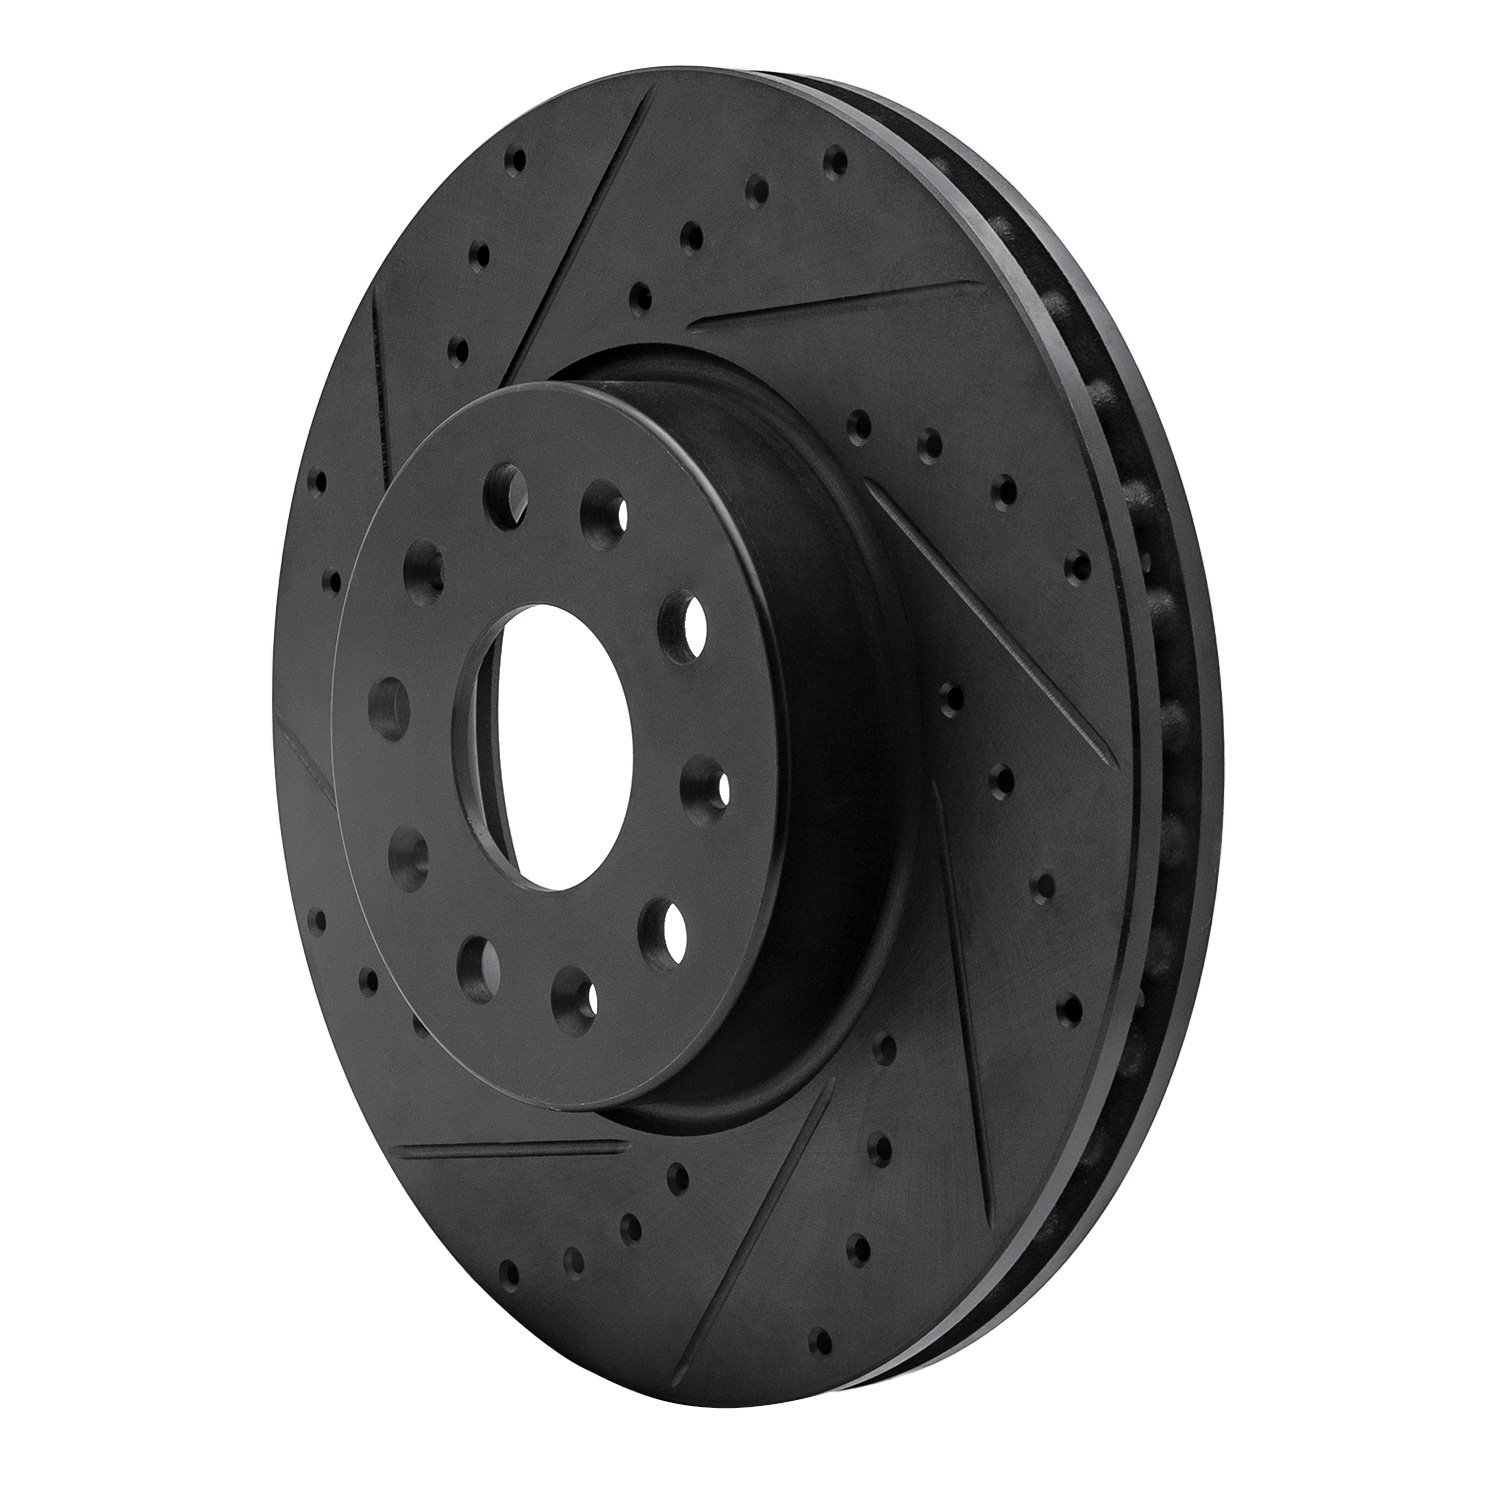 Drilled/Slotted Brake Rotor [Black], Fits Select GM